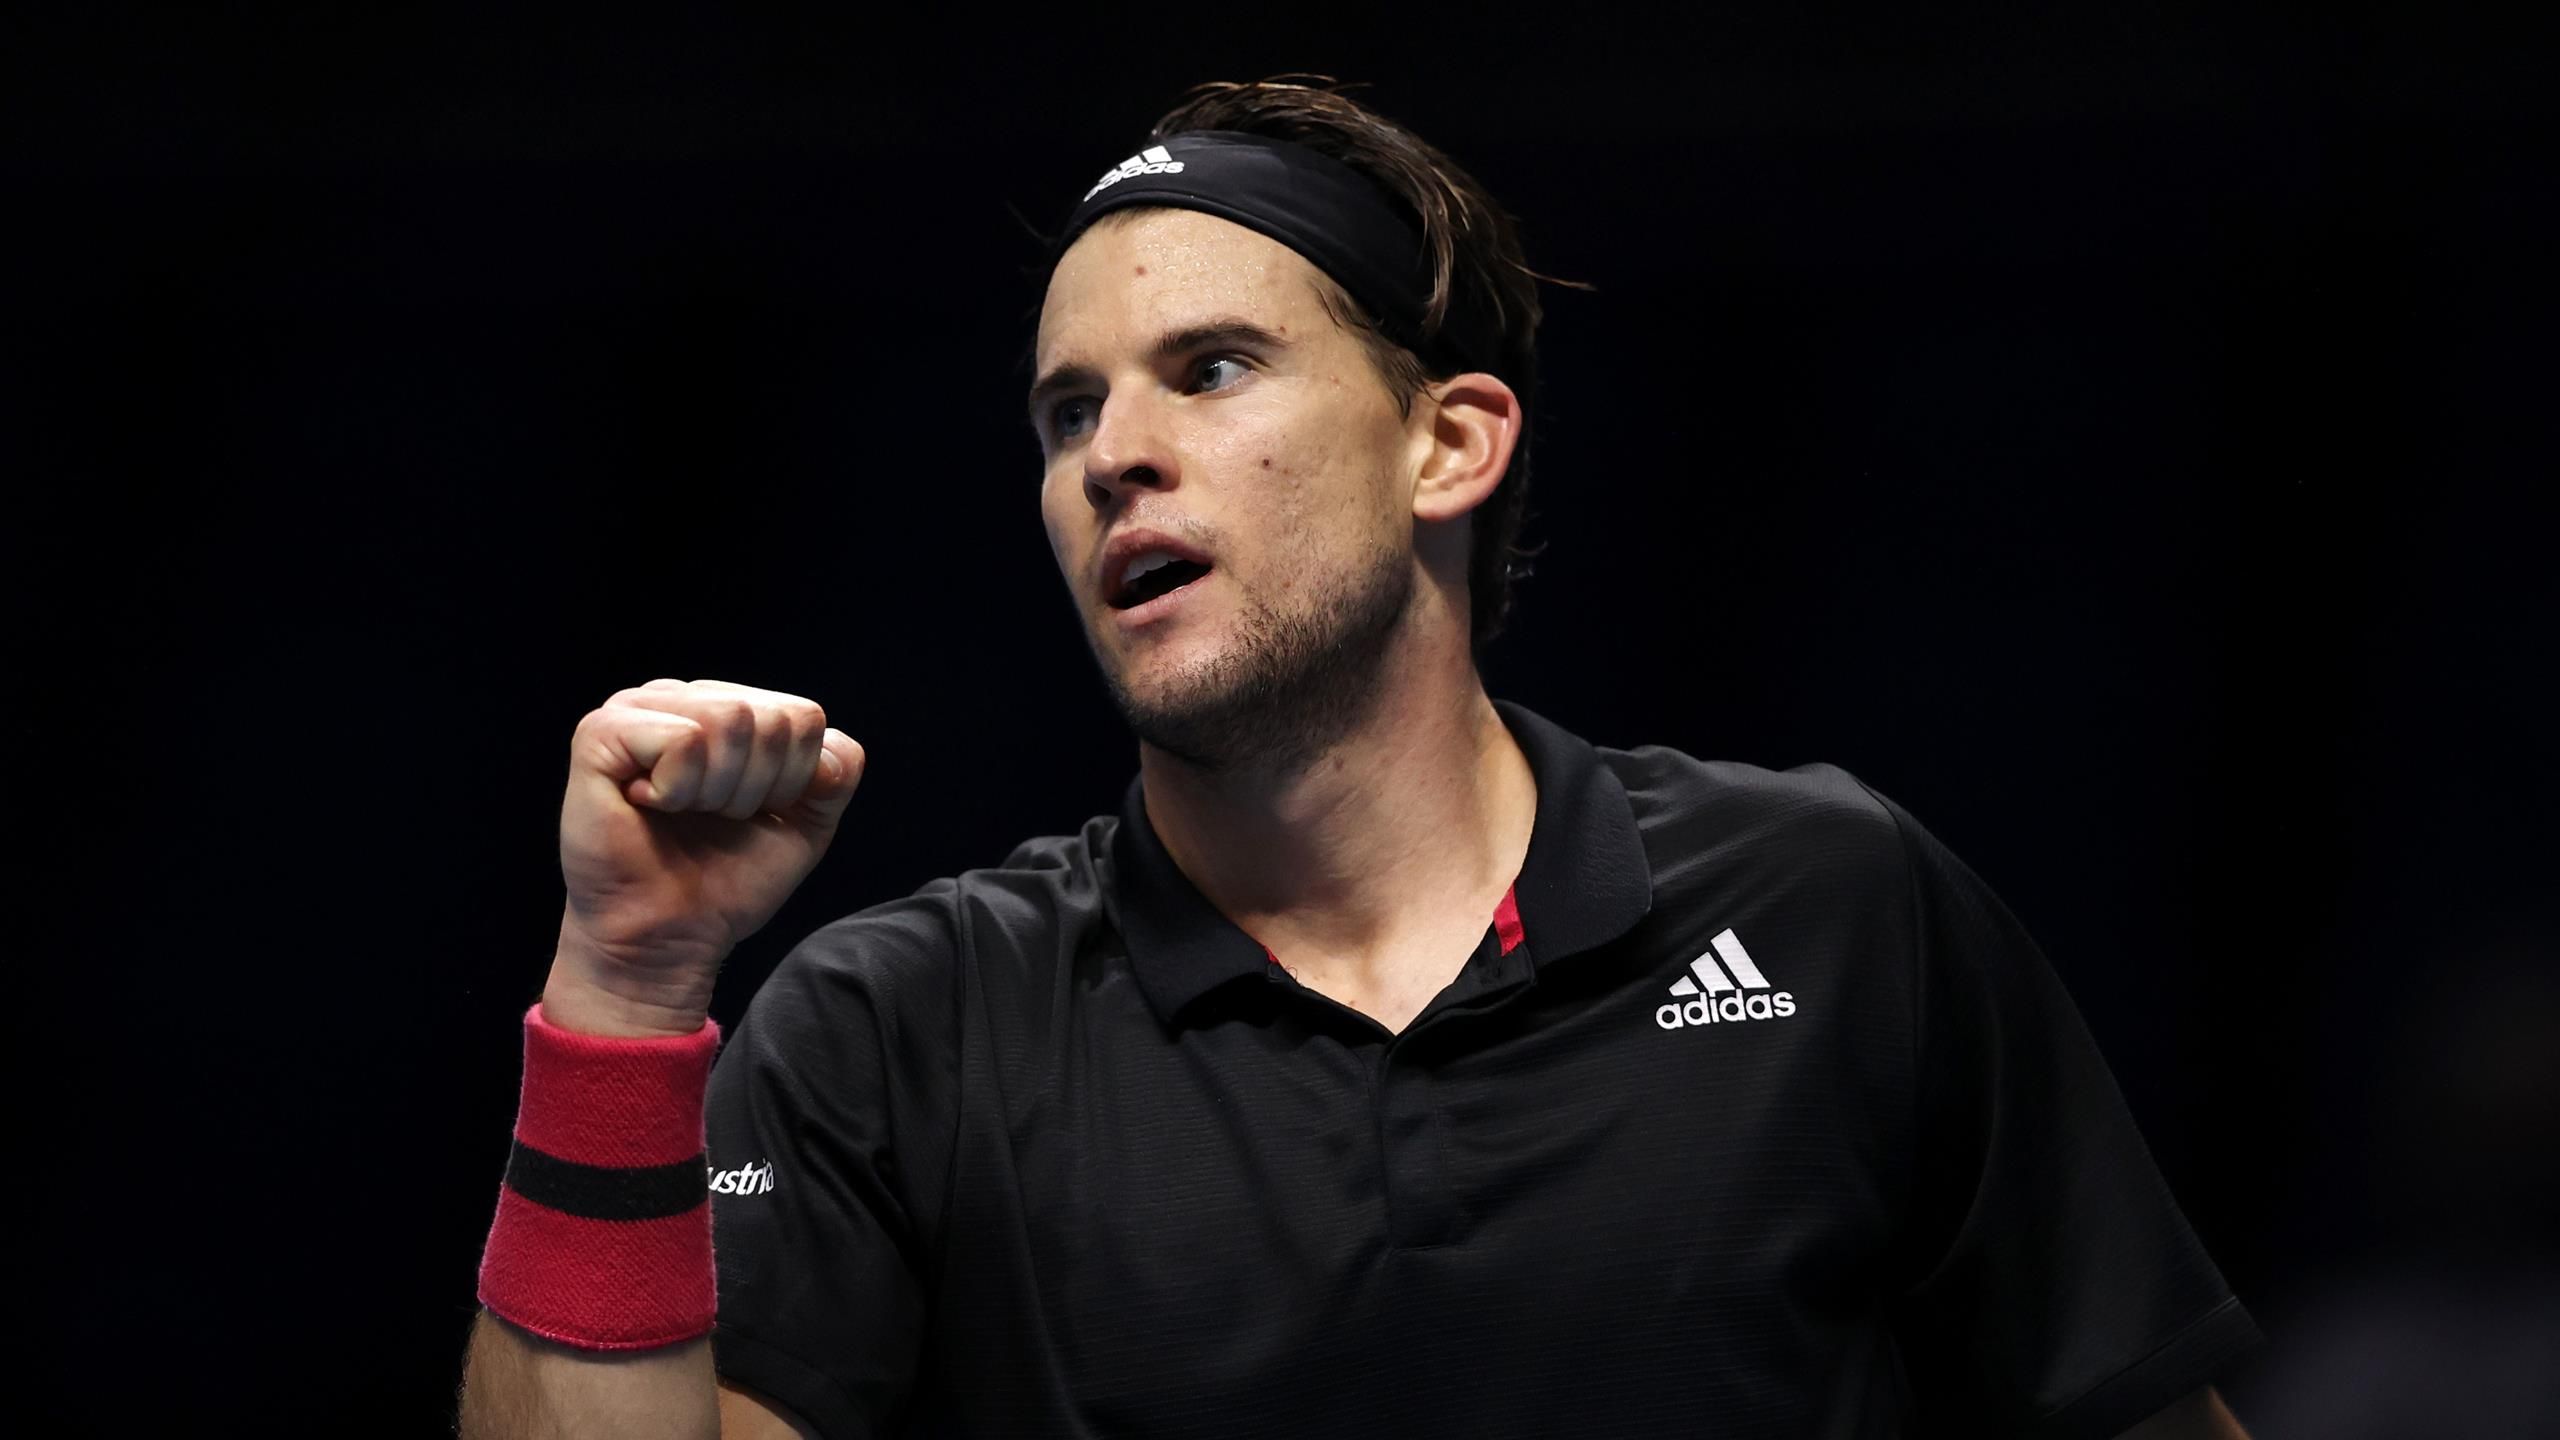 Tokyo 2020 Dominic Thiem has Olympic gold for Austria in his sights with the Games looming